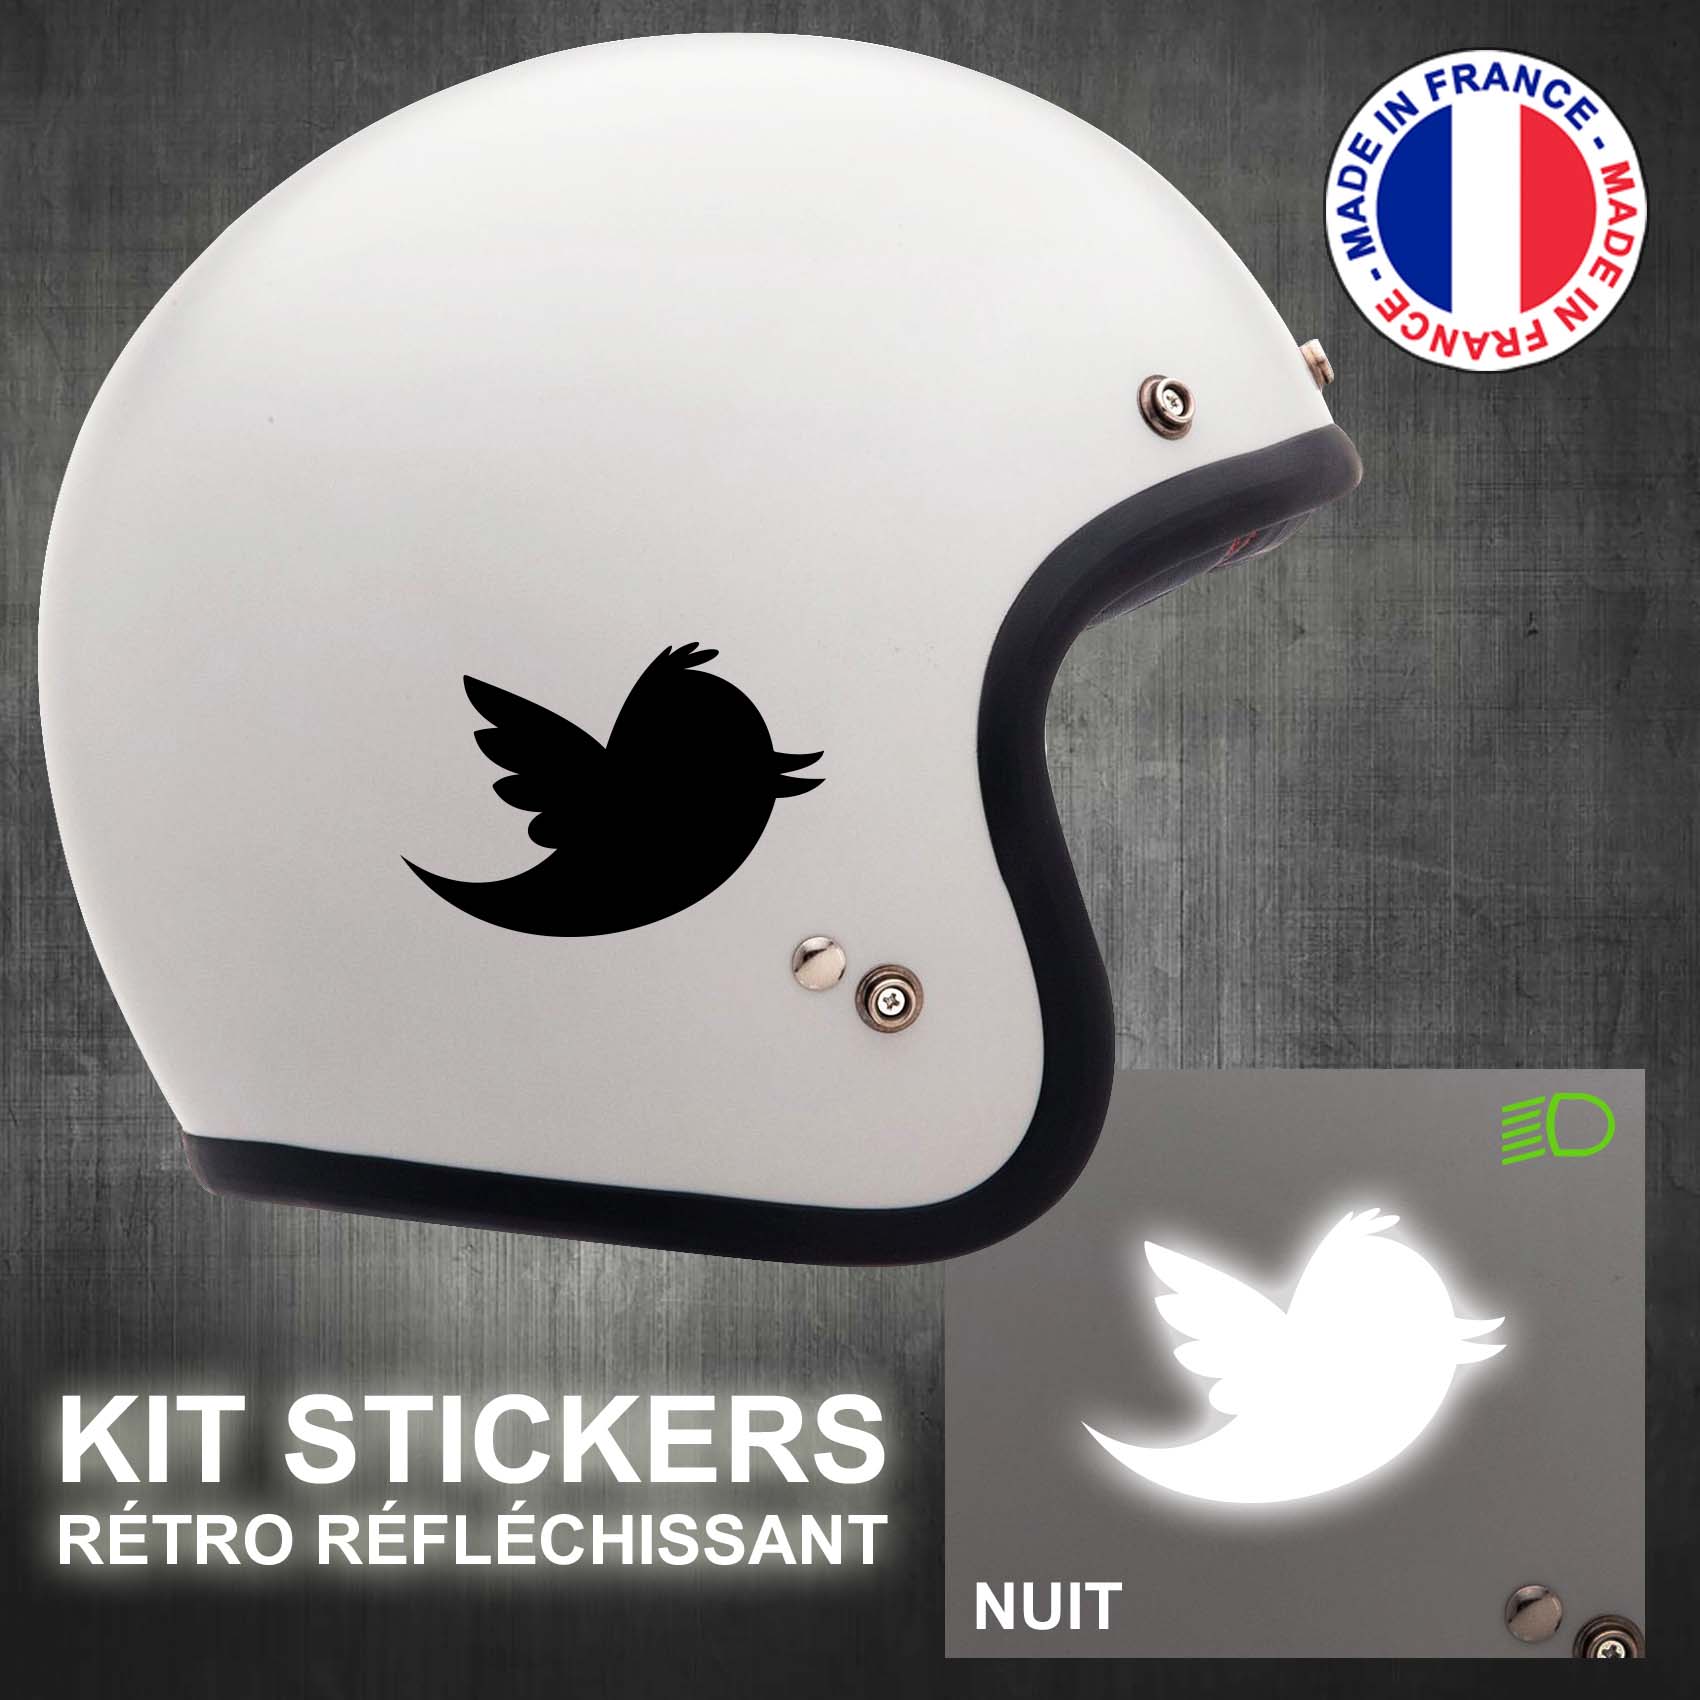 stickers-casque-moto-twitter-ref1-retro-reflechissant-autocollant-moto-velo-tuning-racing-route-sticker-casques-adhesif-scooter-nuit-securite-decals-personnalise-personnalisable-min